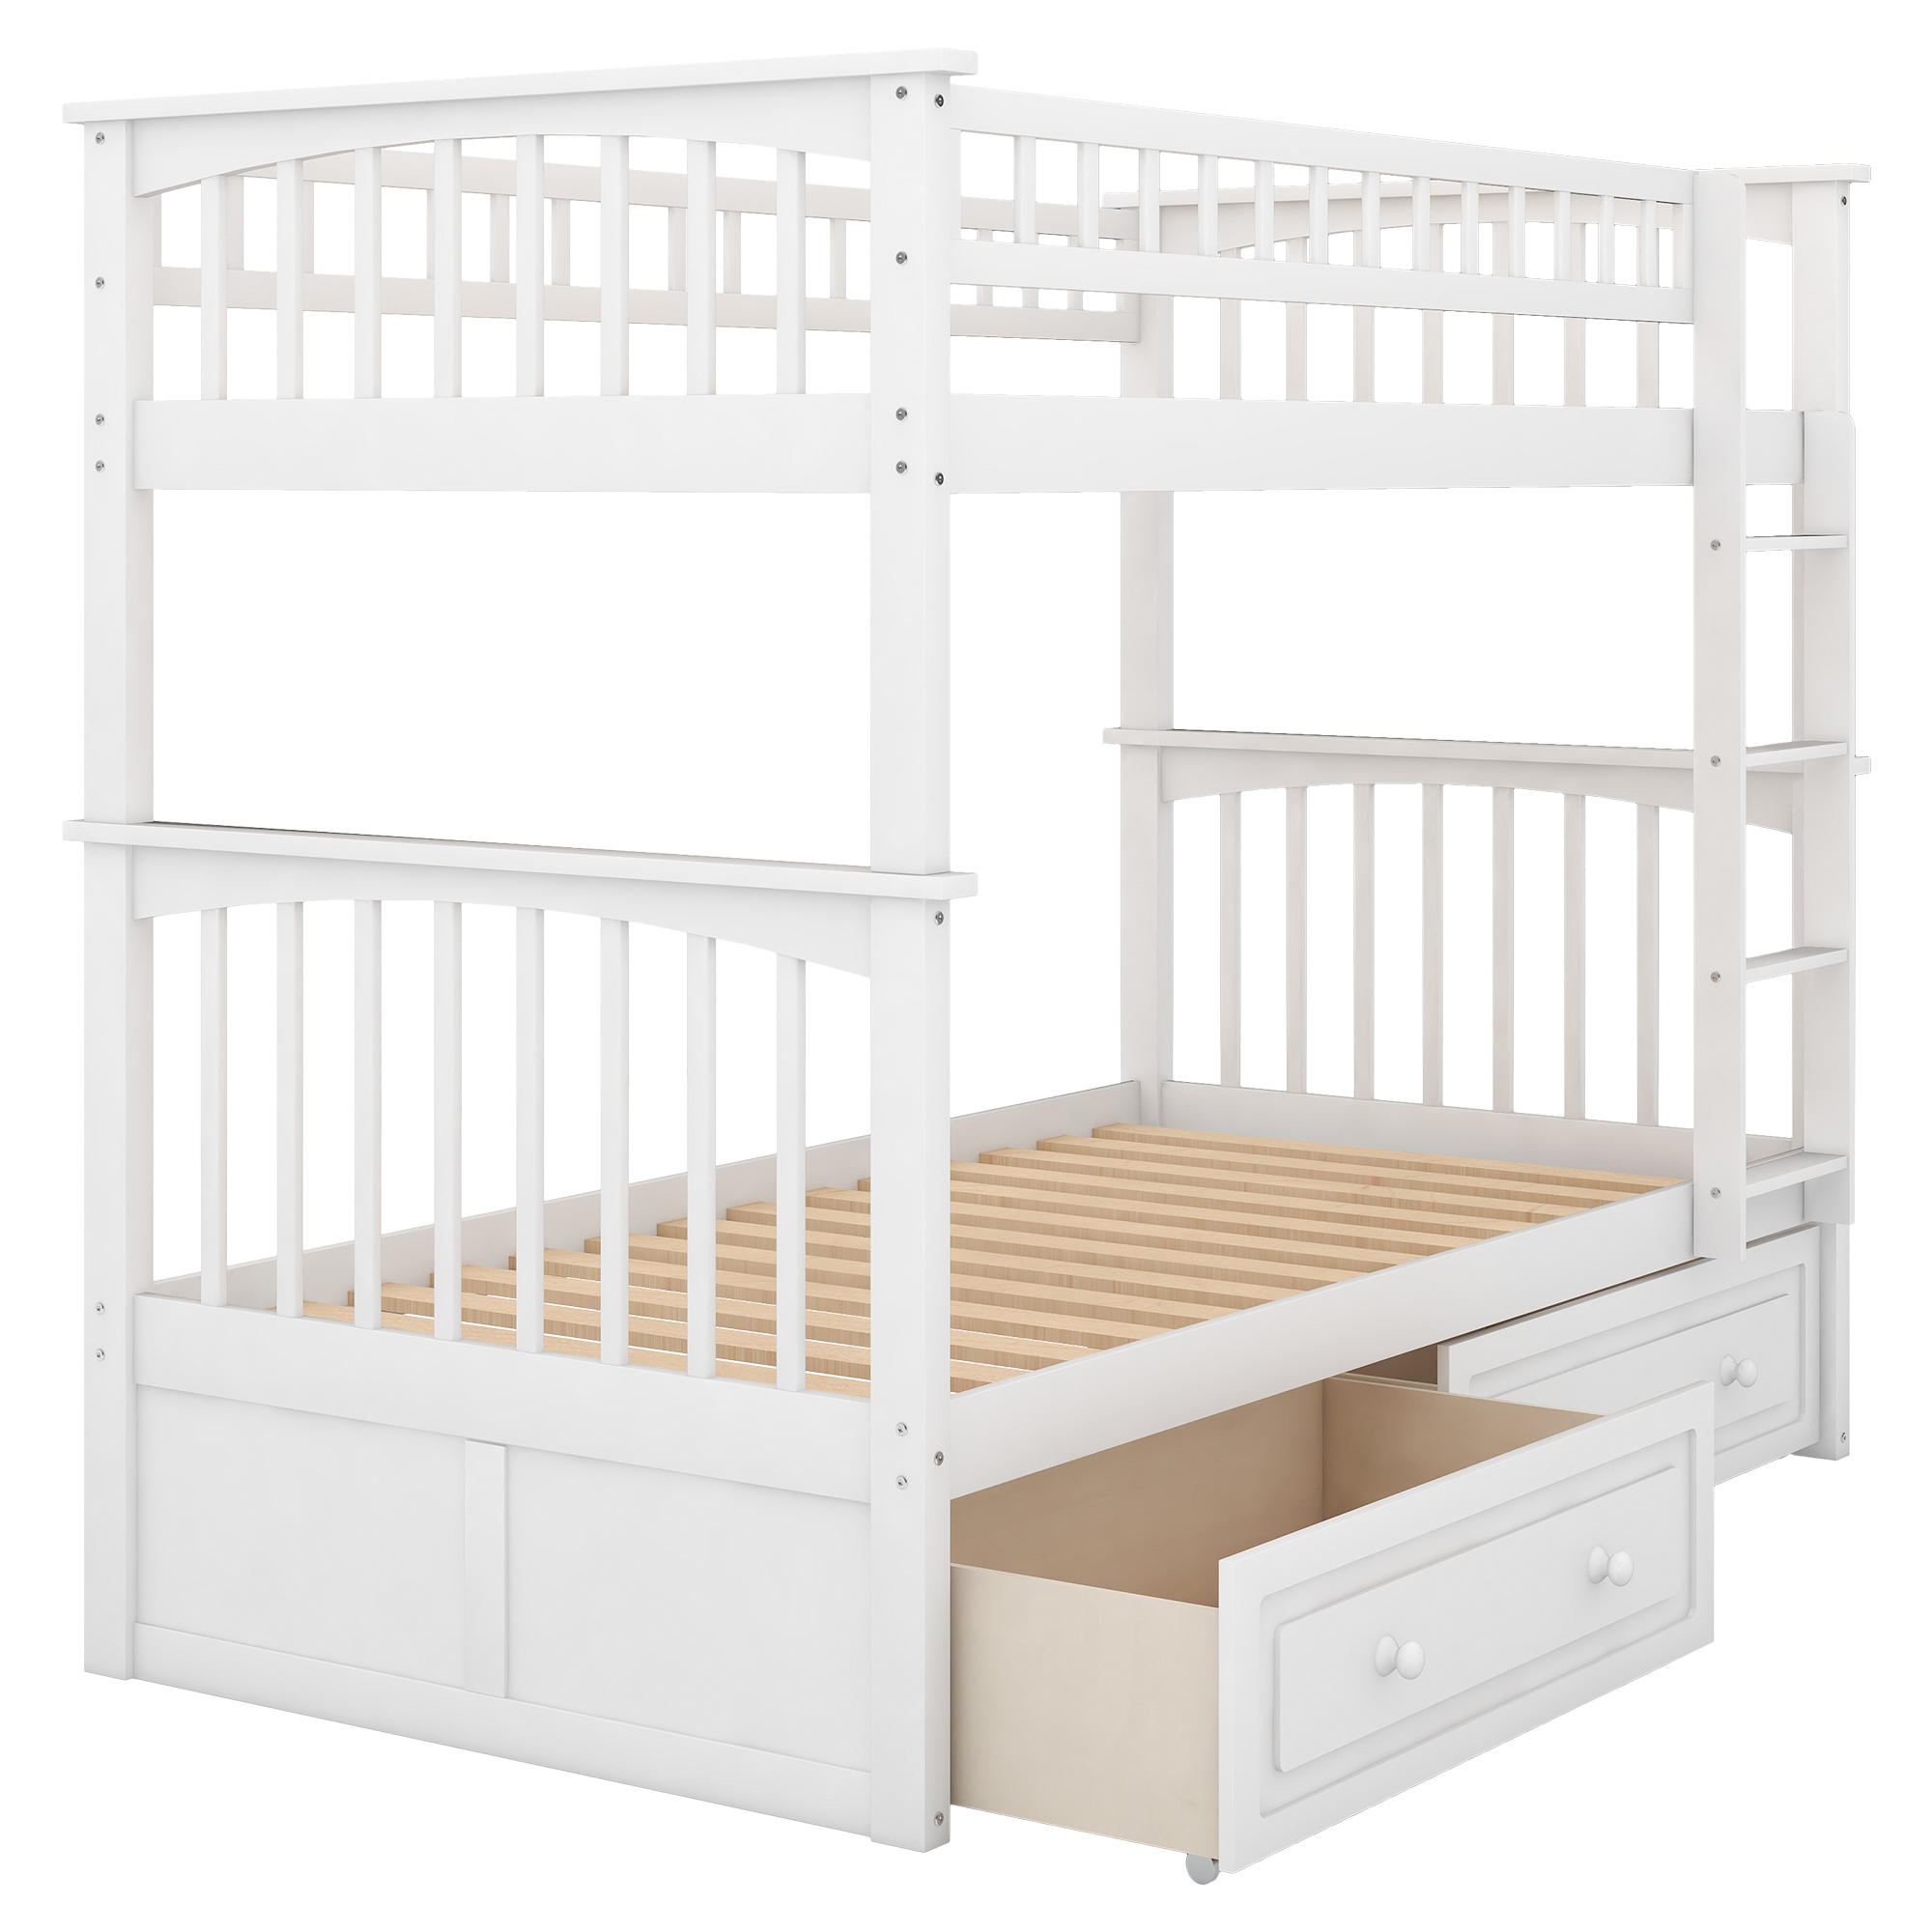 Euroco Pine Wood Bunk Bed with Storage 2 Drawers, Twin-over-Twin Bunk Bed with Safety Rail and Ladder for Kids, Converted into 2 Single Beds, Sapce-Saving Design, White - image 5 of 14